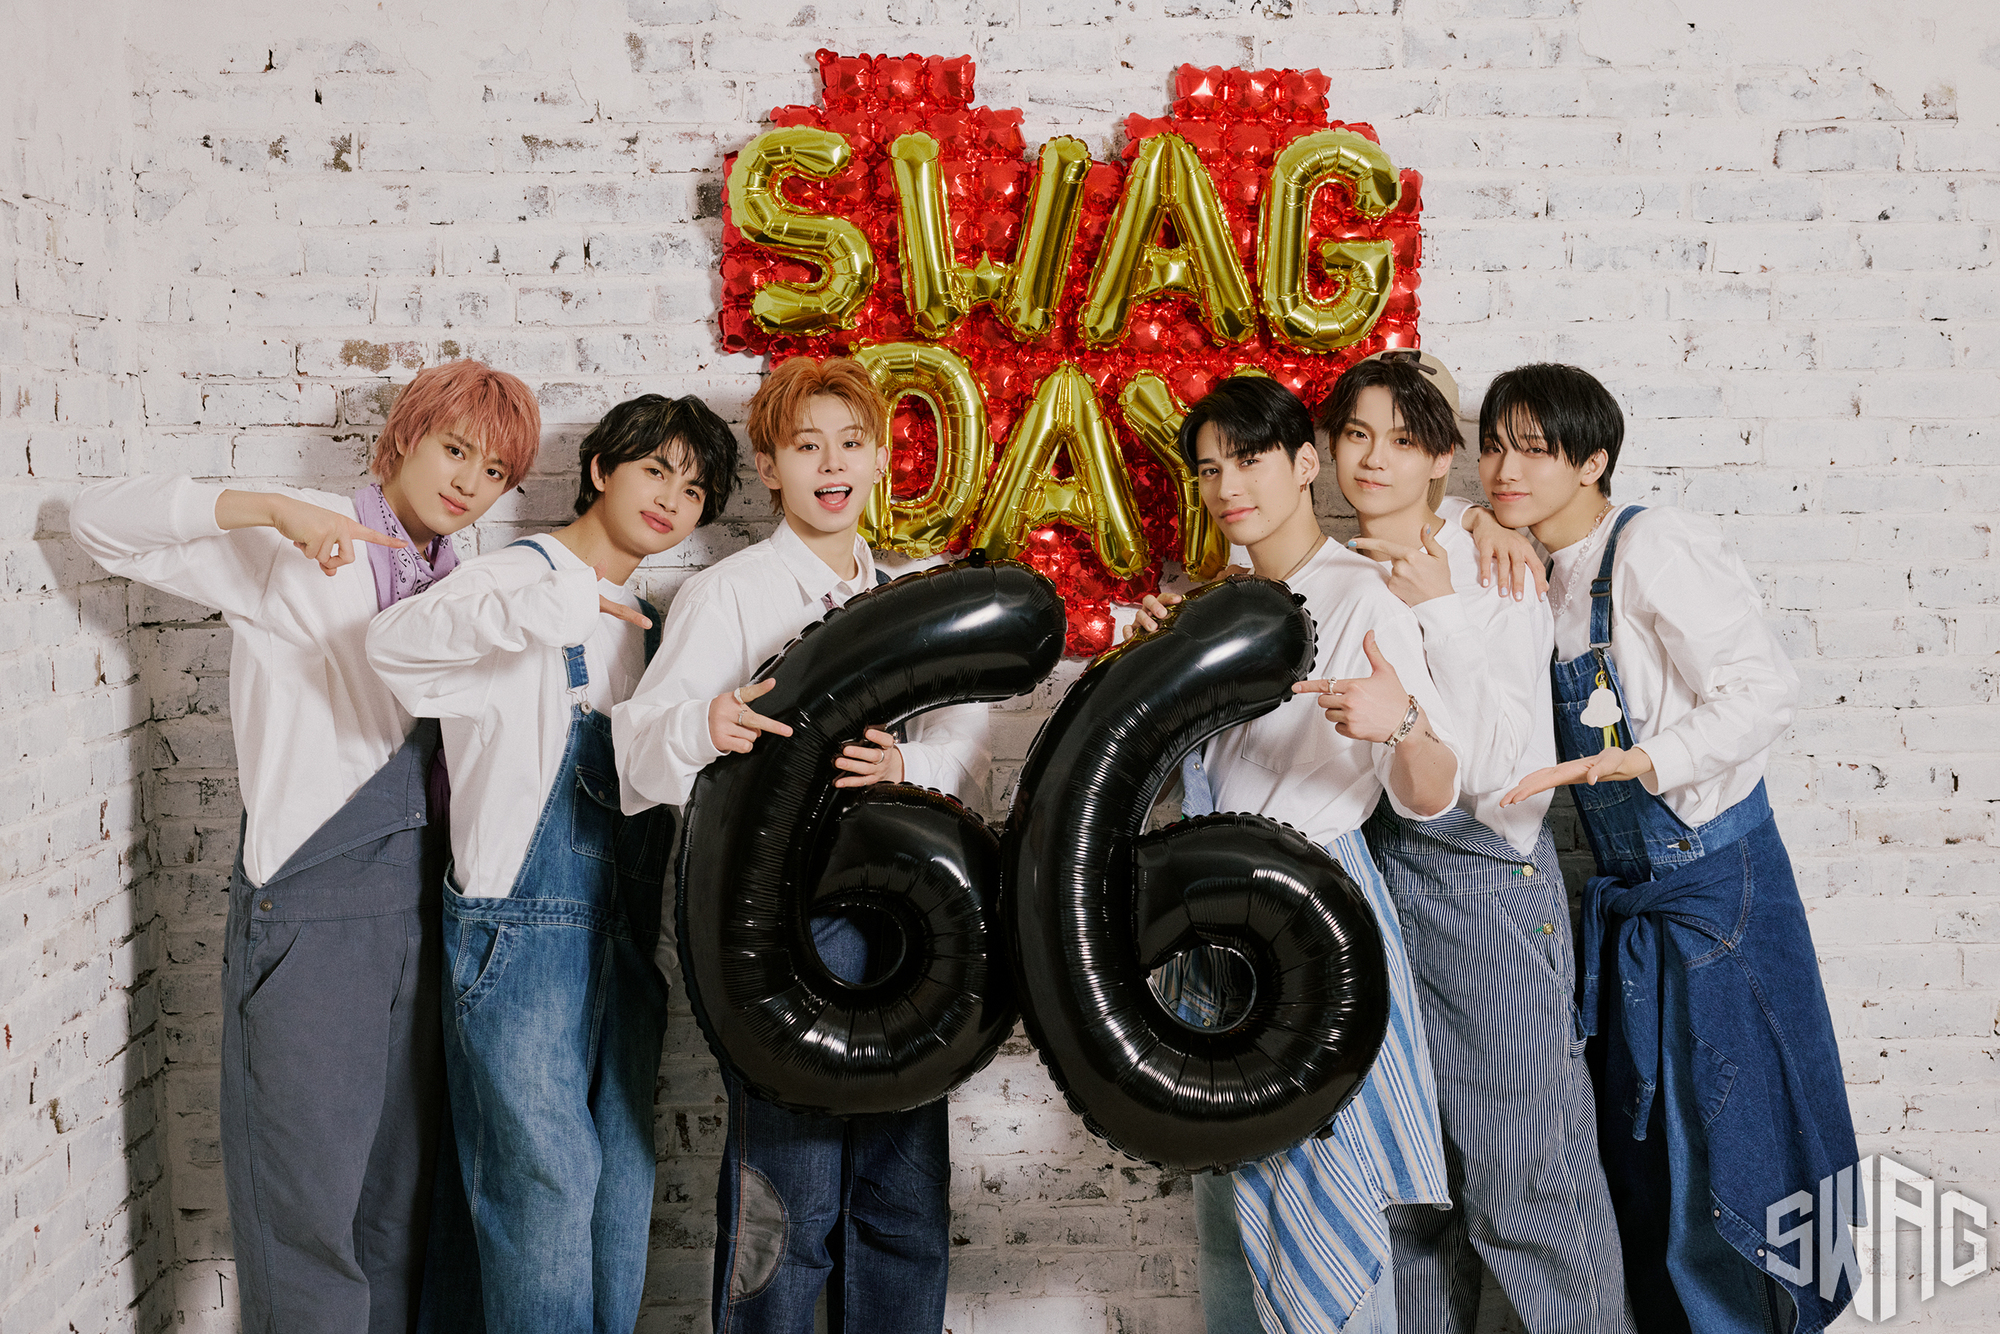 「SWAG DAY」開幕！